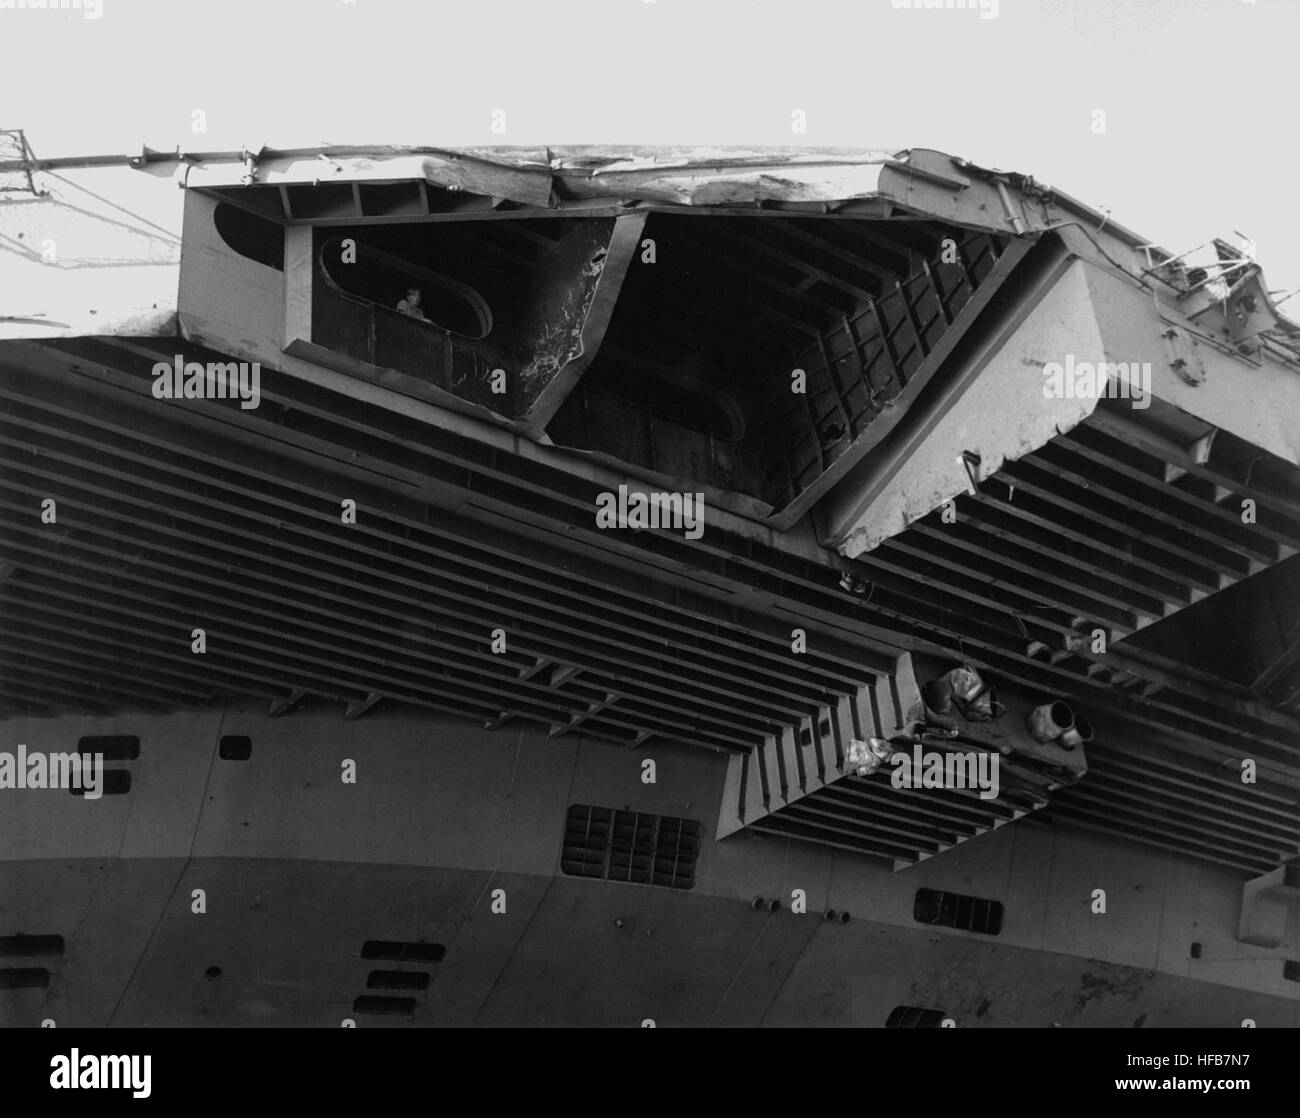 A view of damage sustained by the aircraft carrier USS JOHN F. KENNEDY (CV-67) when it collided with the guided missile cruiser USS BELKNAP (CG-26) during night operations on Nov. 22, 1975. DN-SN-87-07332 USS John F. Kennedy damaged front end of angled deck Stock Photo